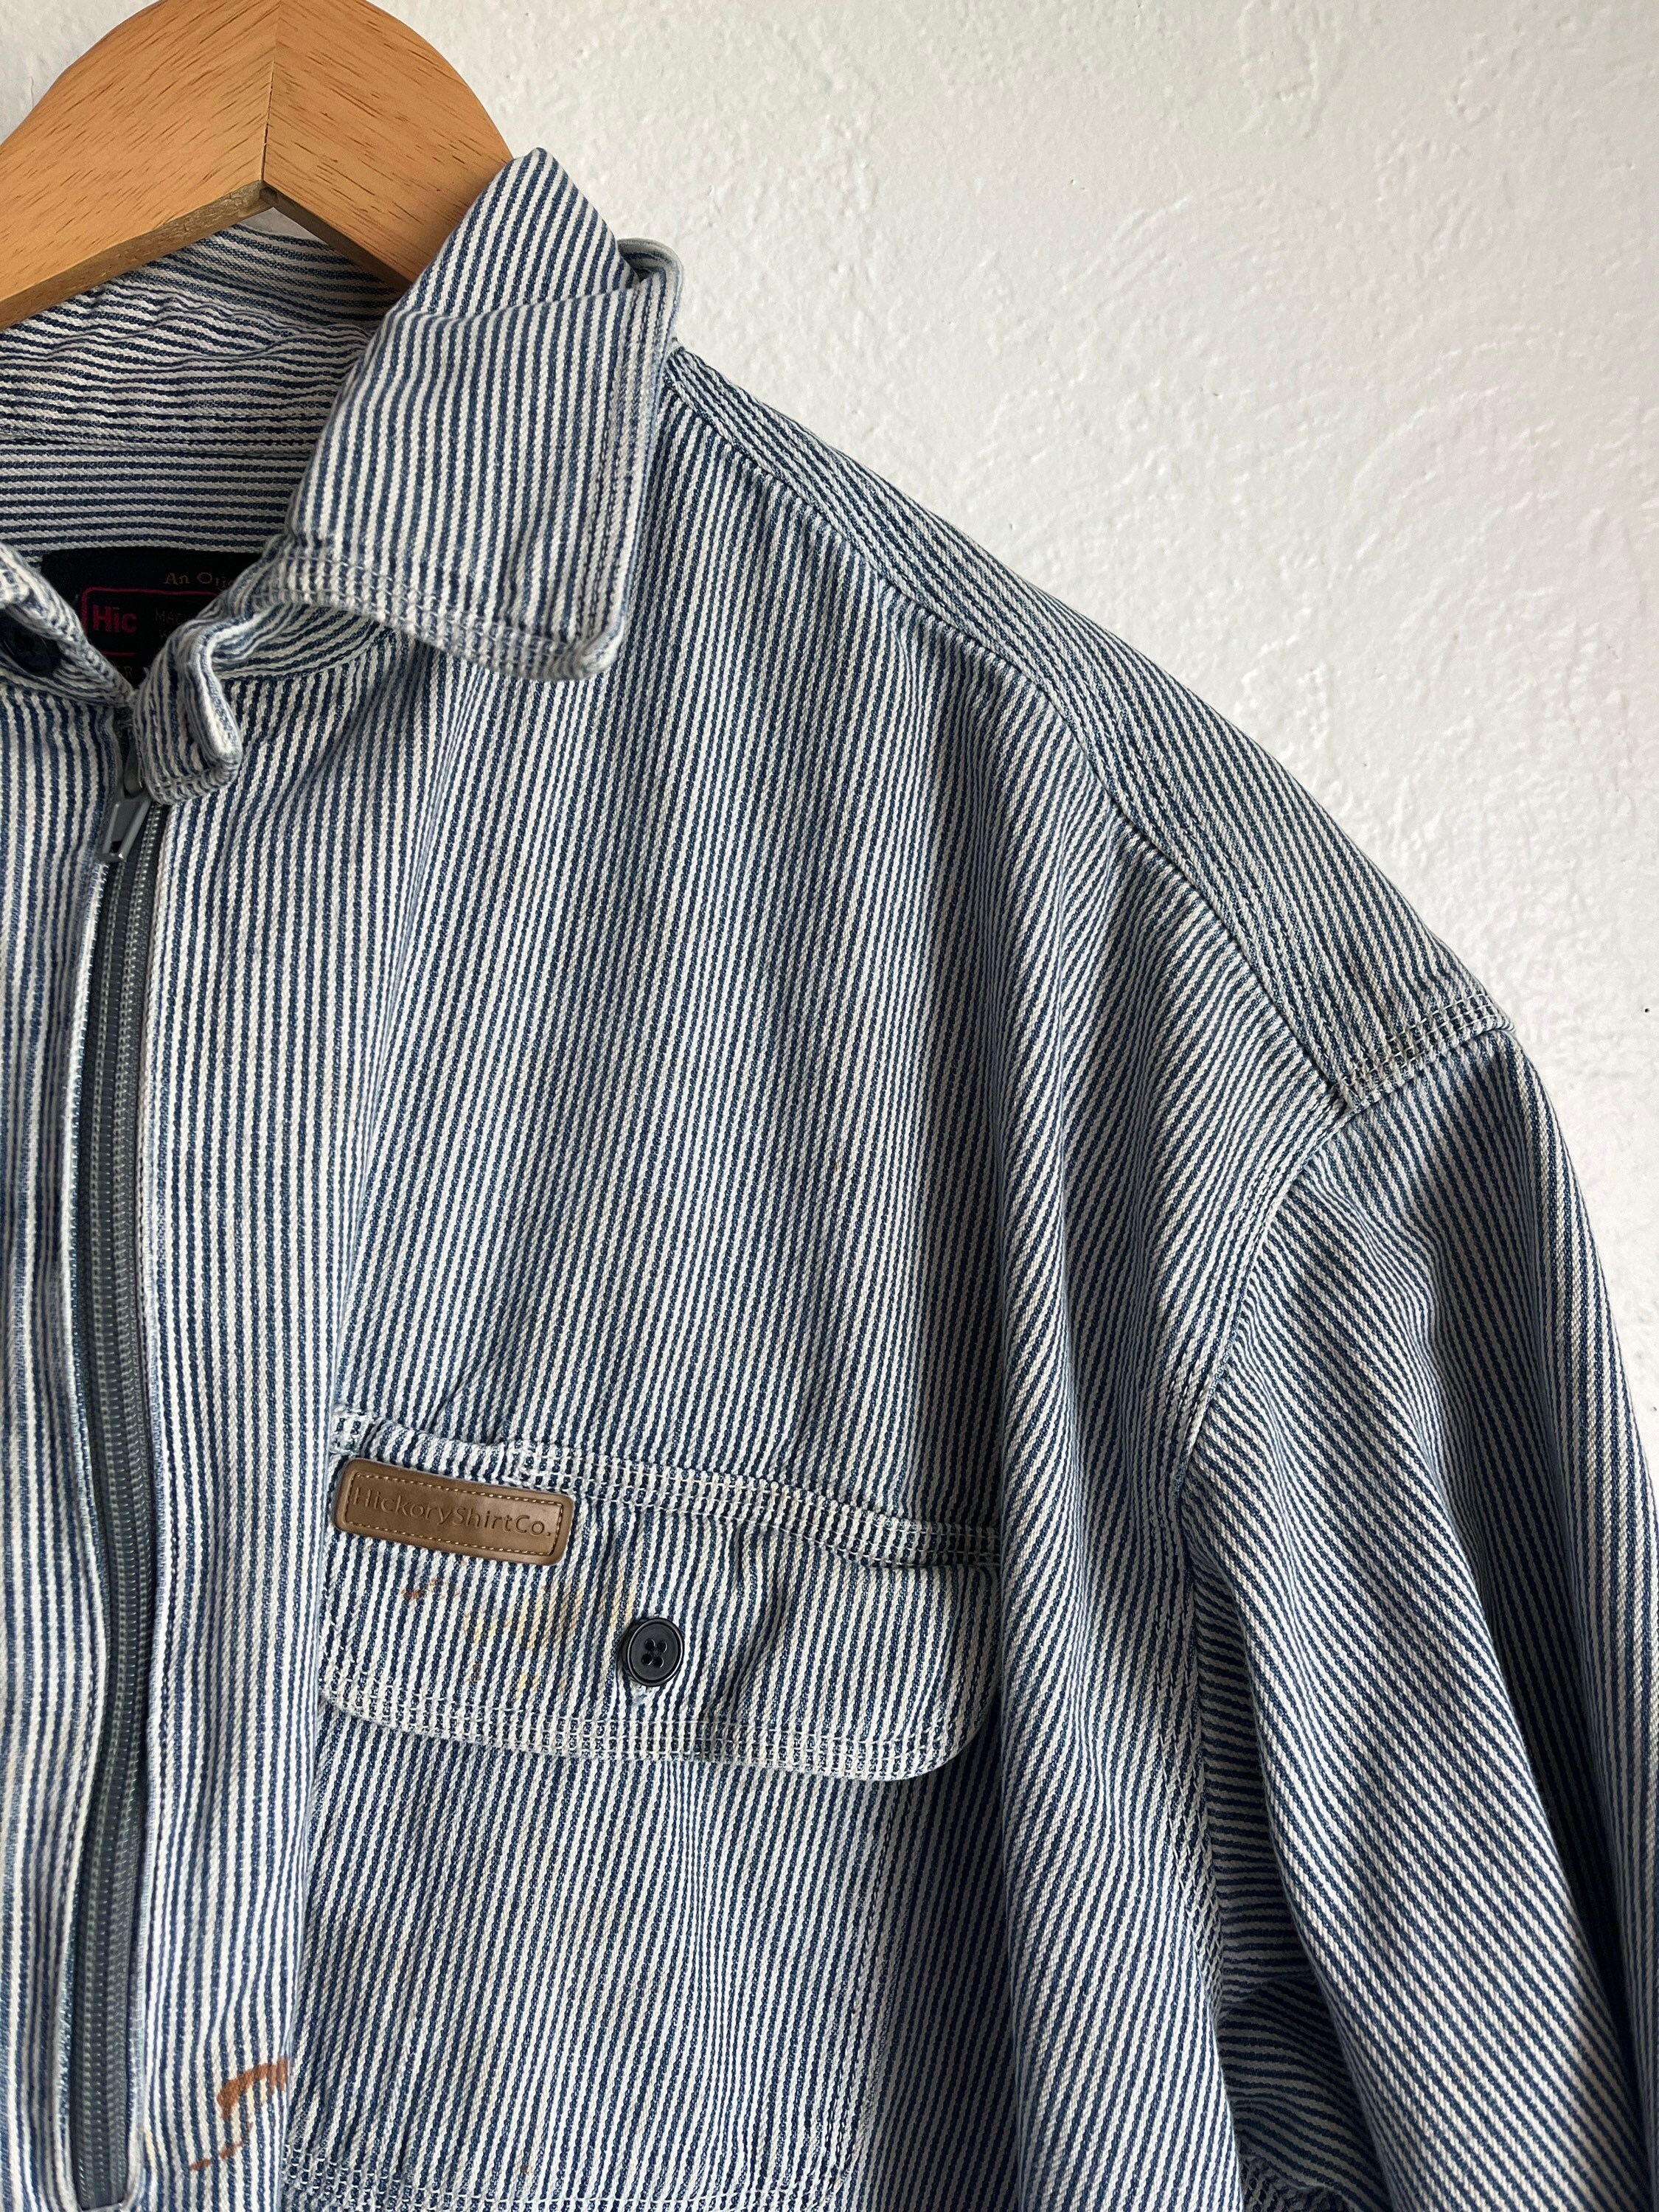 Distressed Hickory Shirt Co Zipper Front Shirt 2XL - Etsy